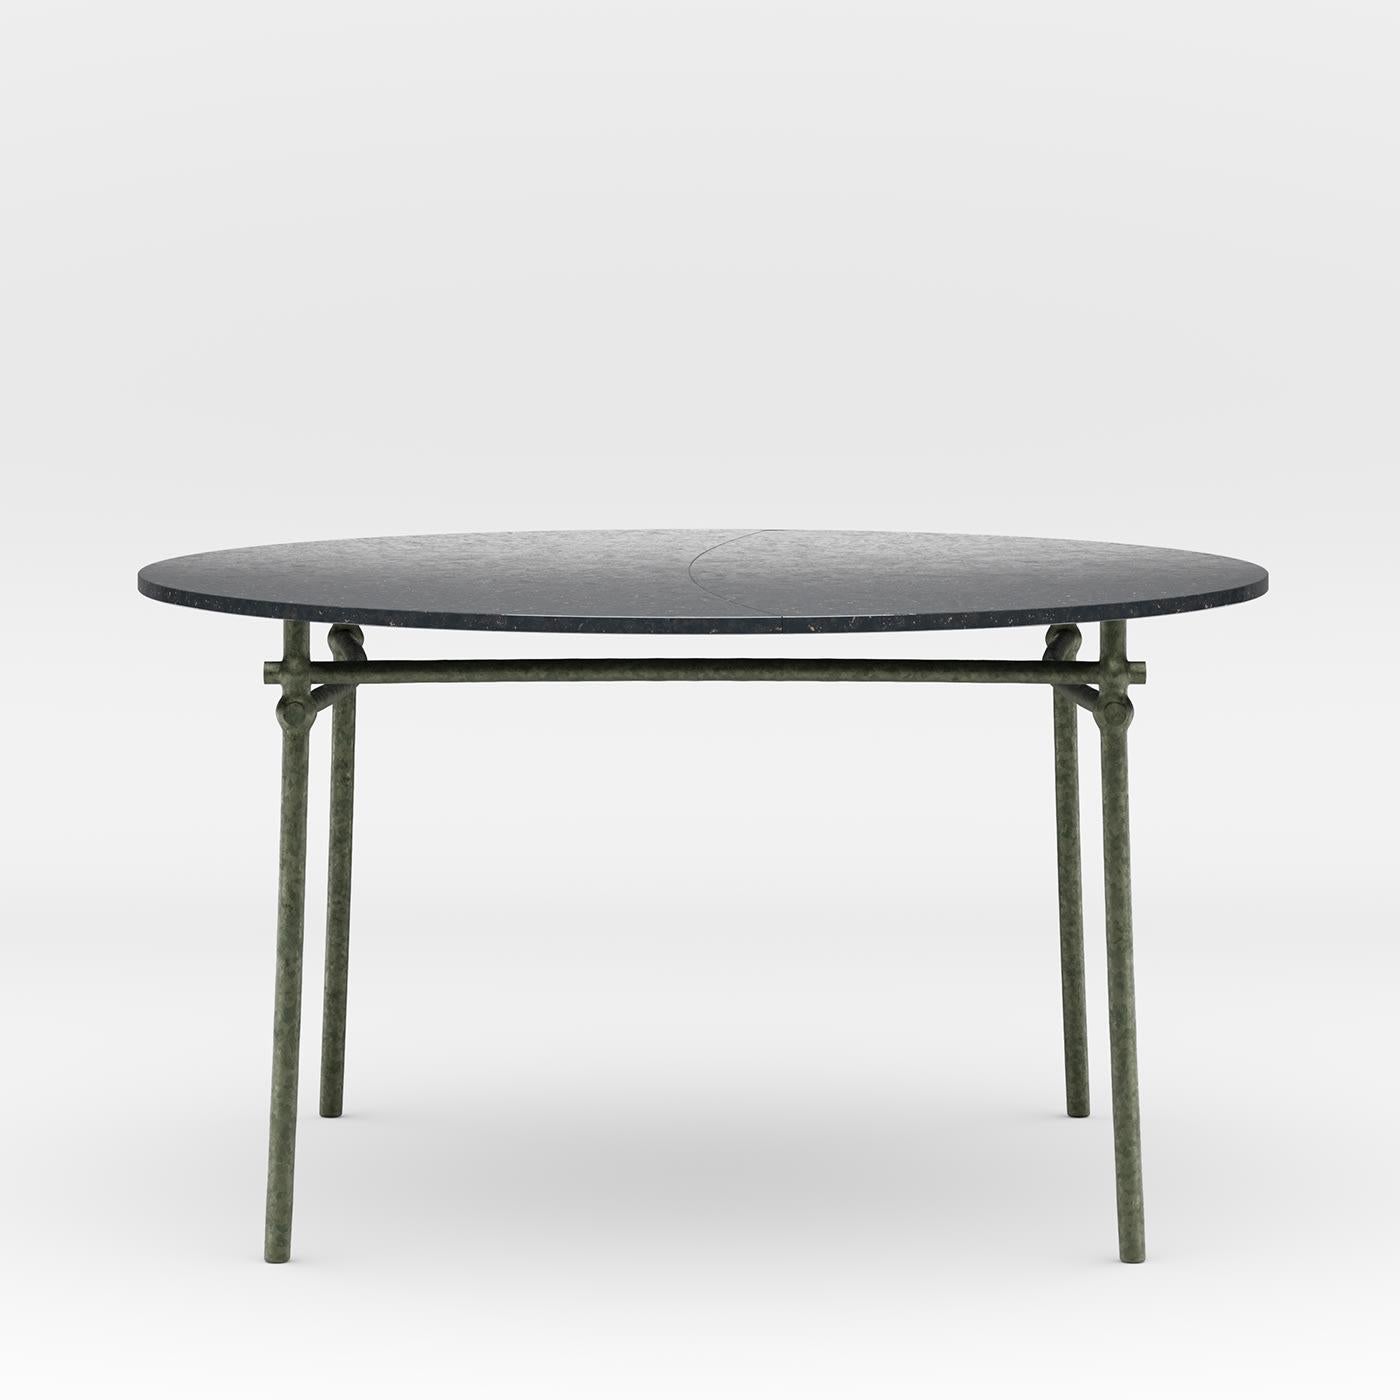 An industrial-chic design of timeless sophistication, this round dining table will make for a stately accent to a contemporary setting, ideally combined with the gazebo and other furniture by Dante Negro. Designed in collaboration with